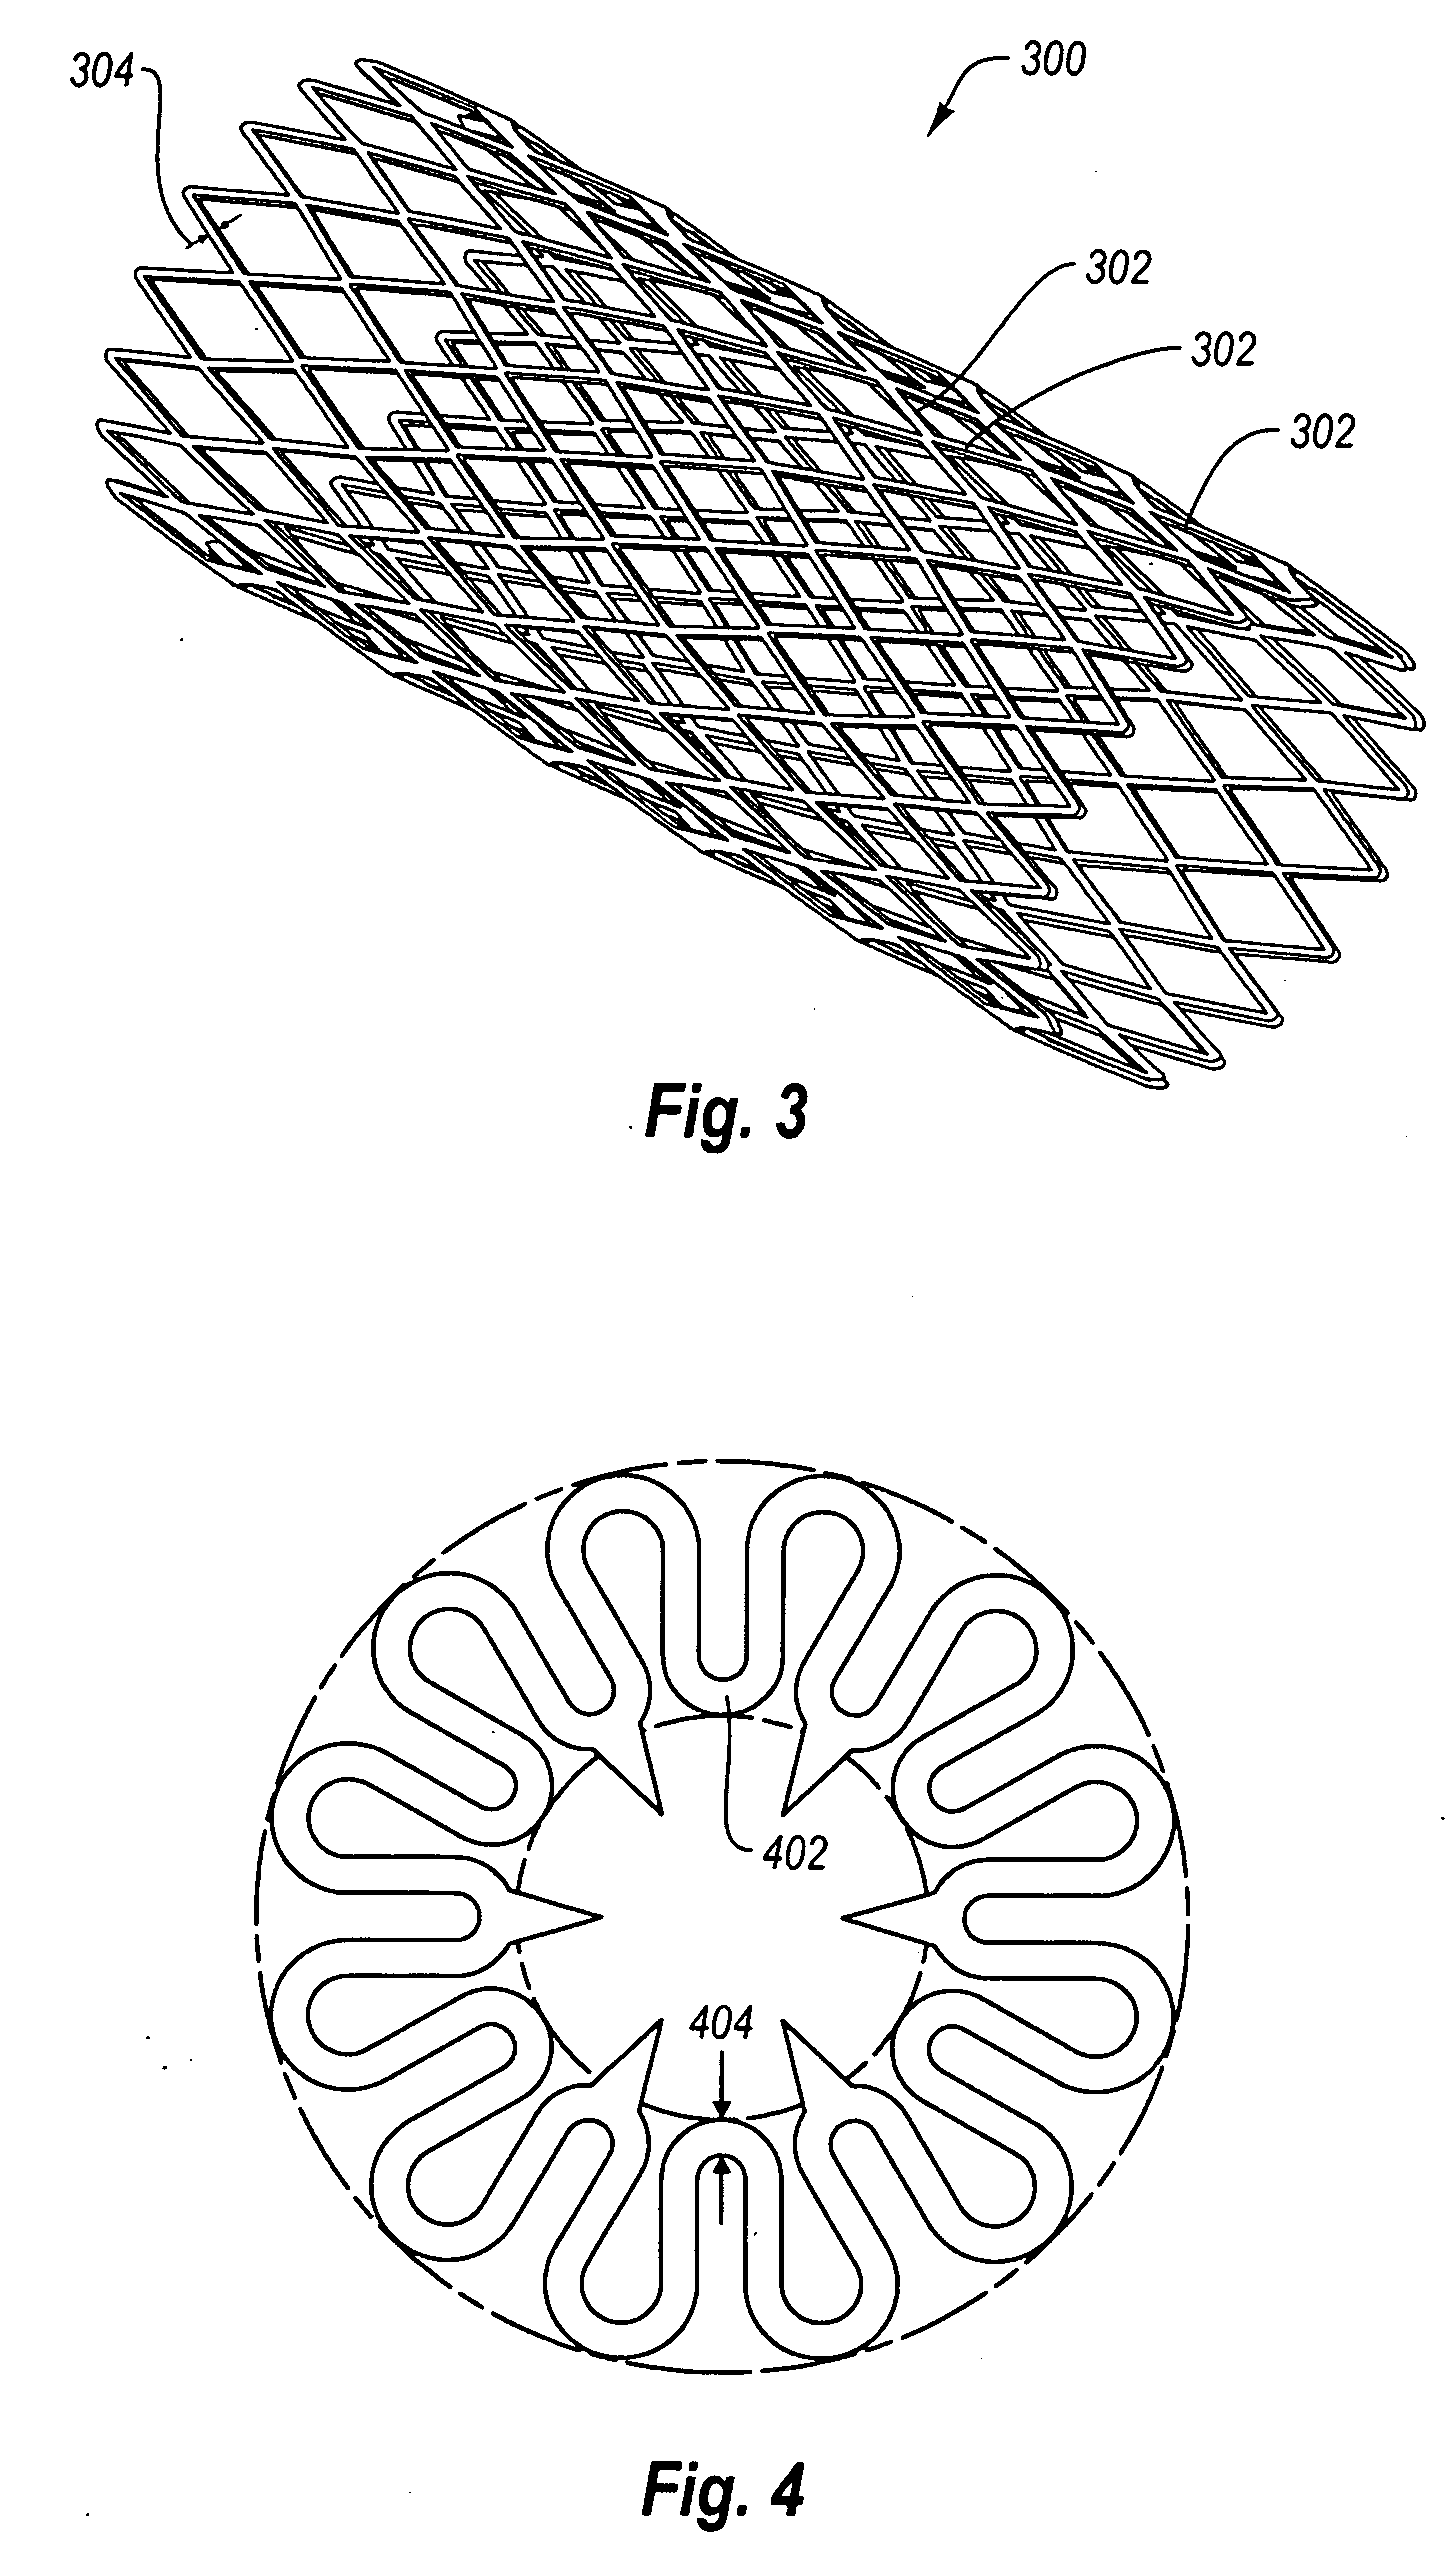 Fatigue-resistant nickel-titanium alloys and medical devices using same